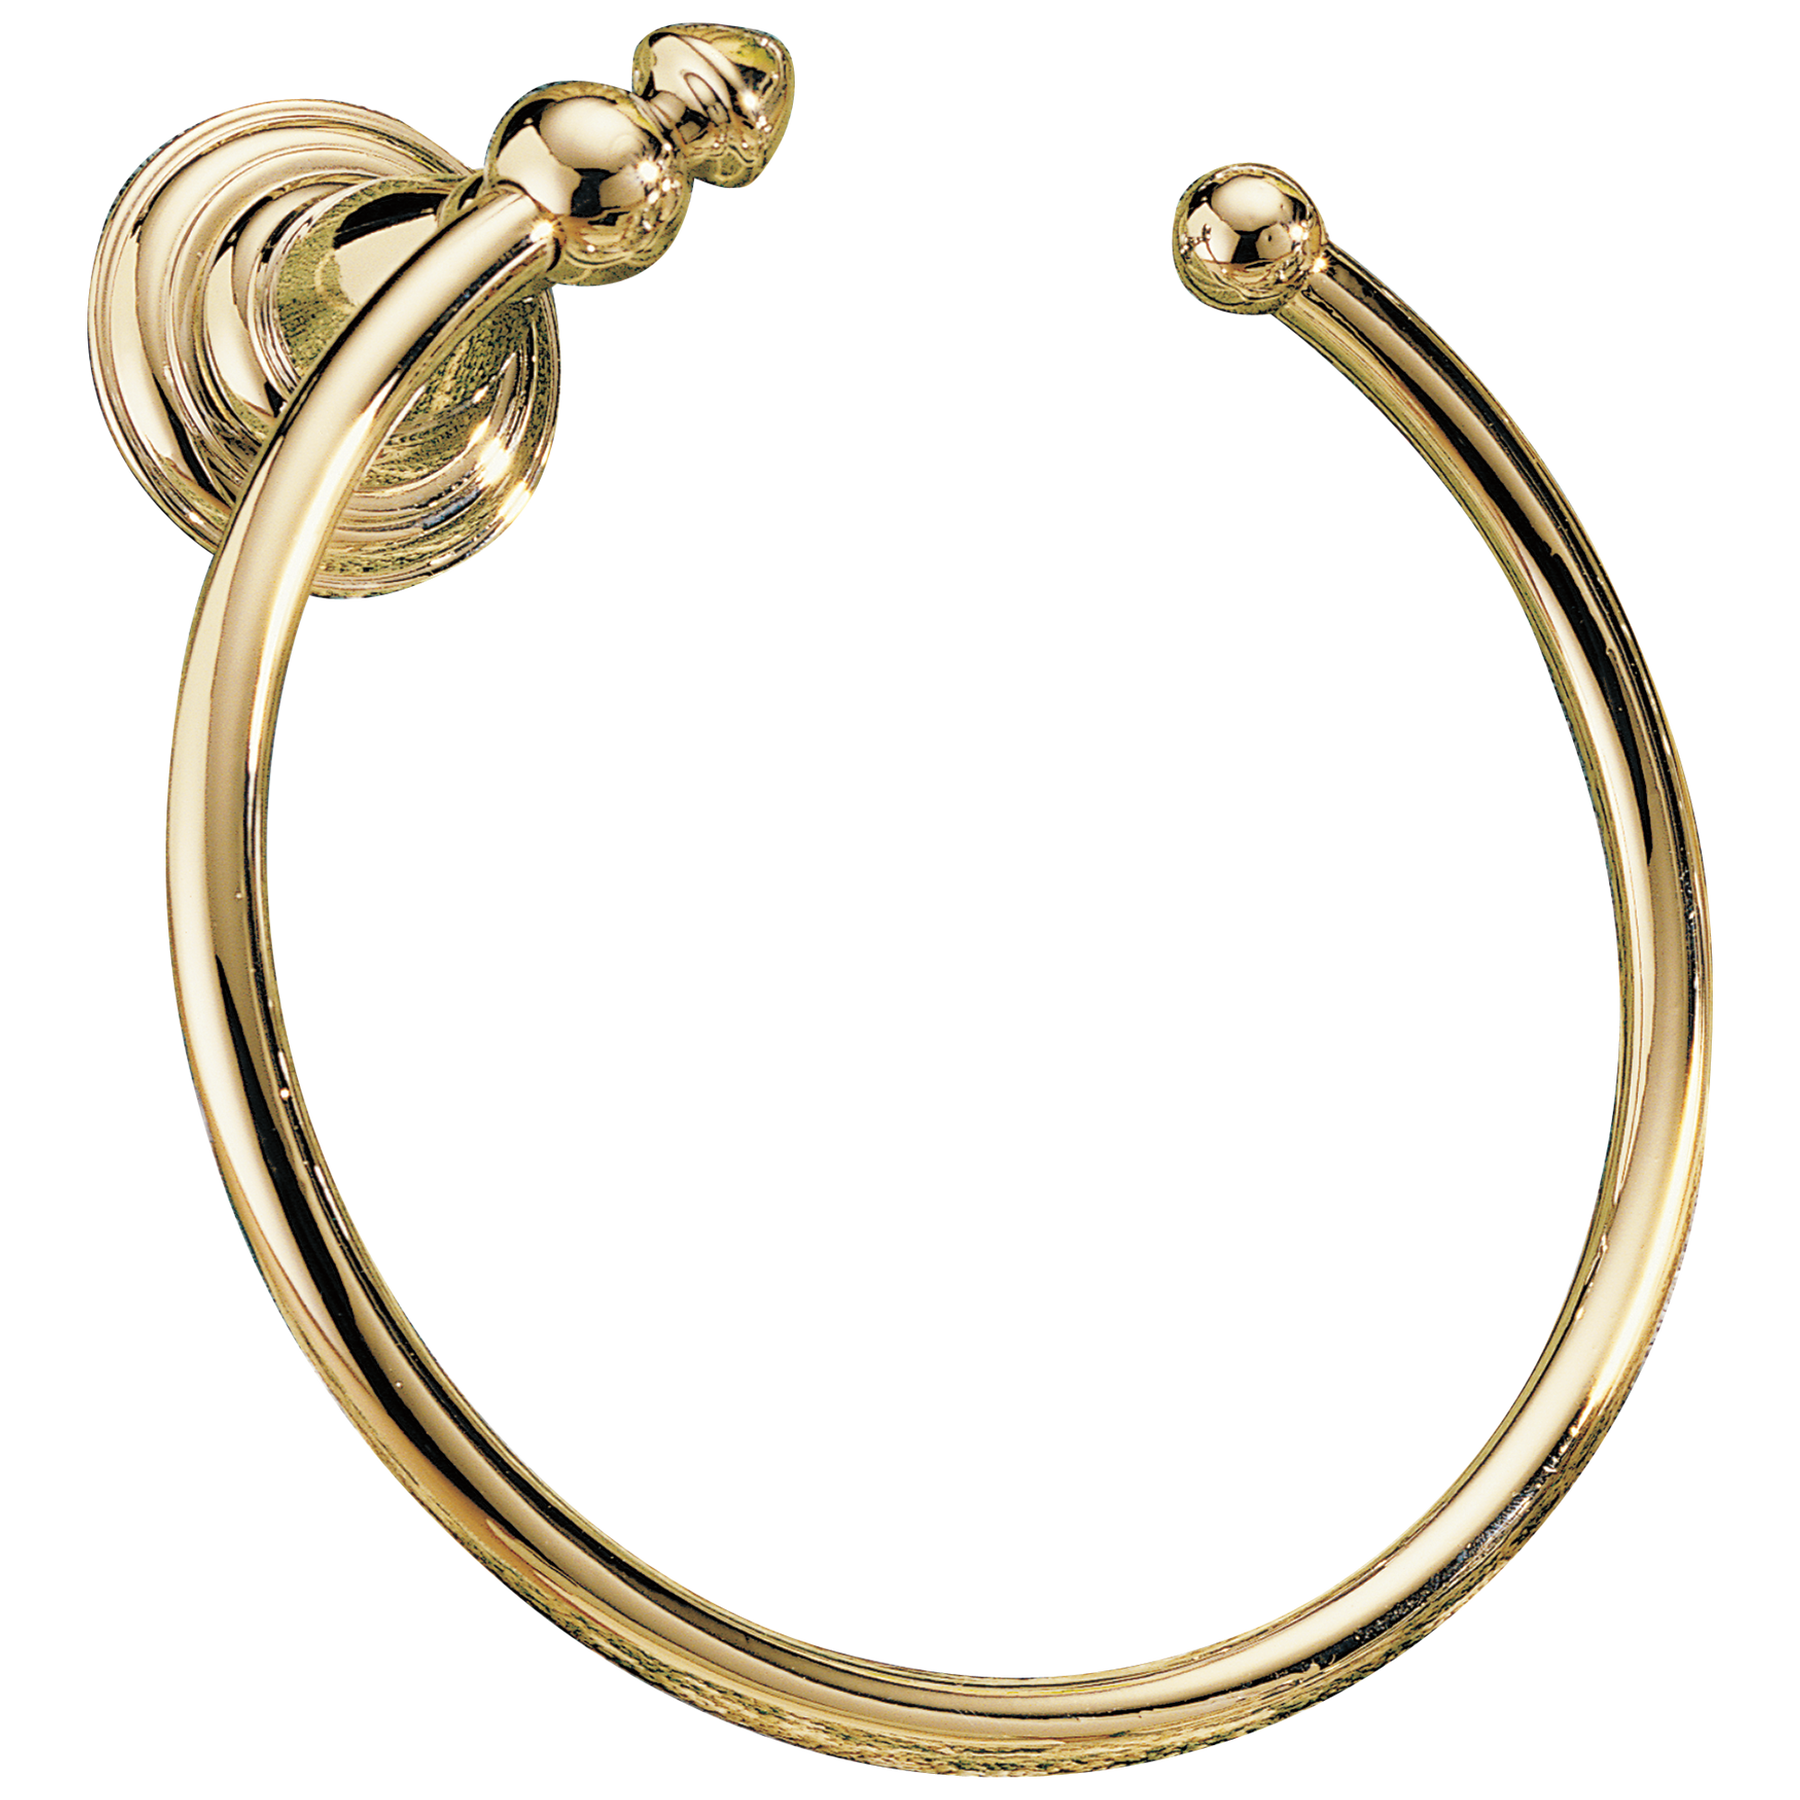 Towel Ring in Polished Brass 75046-PB